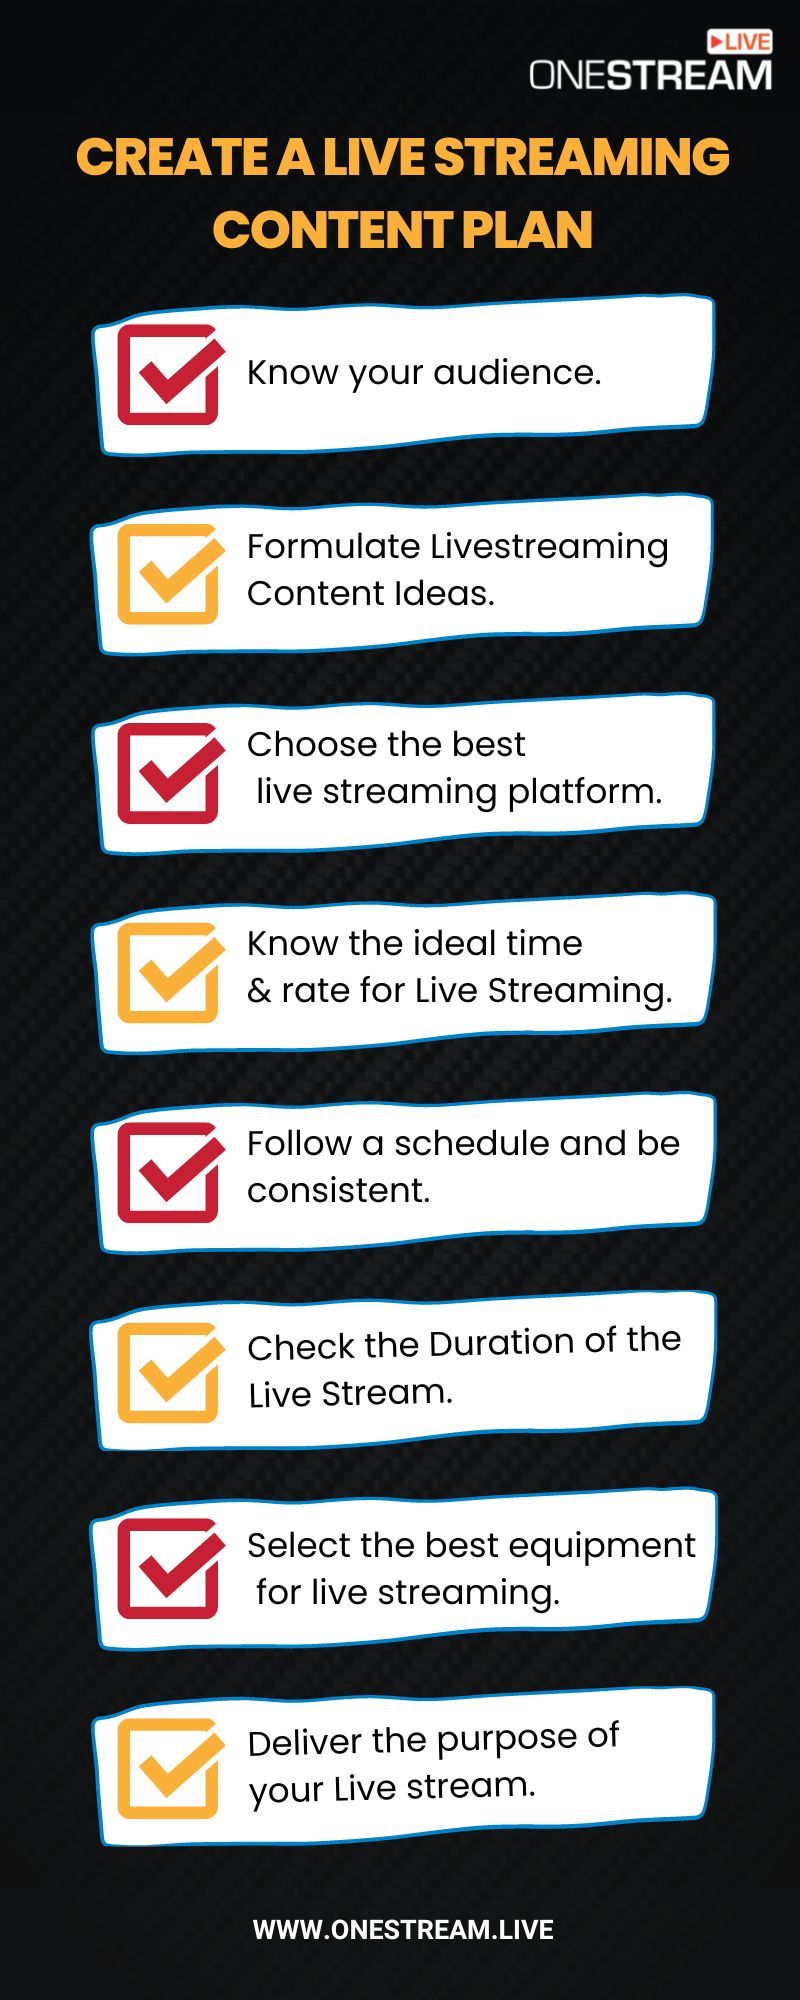 Tips for live streaming content plan